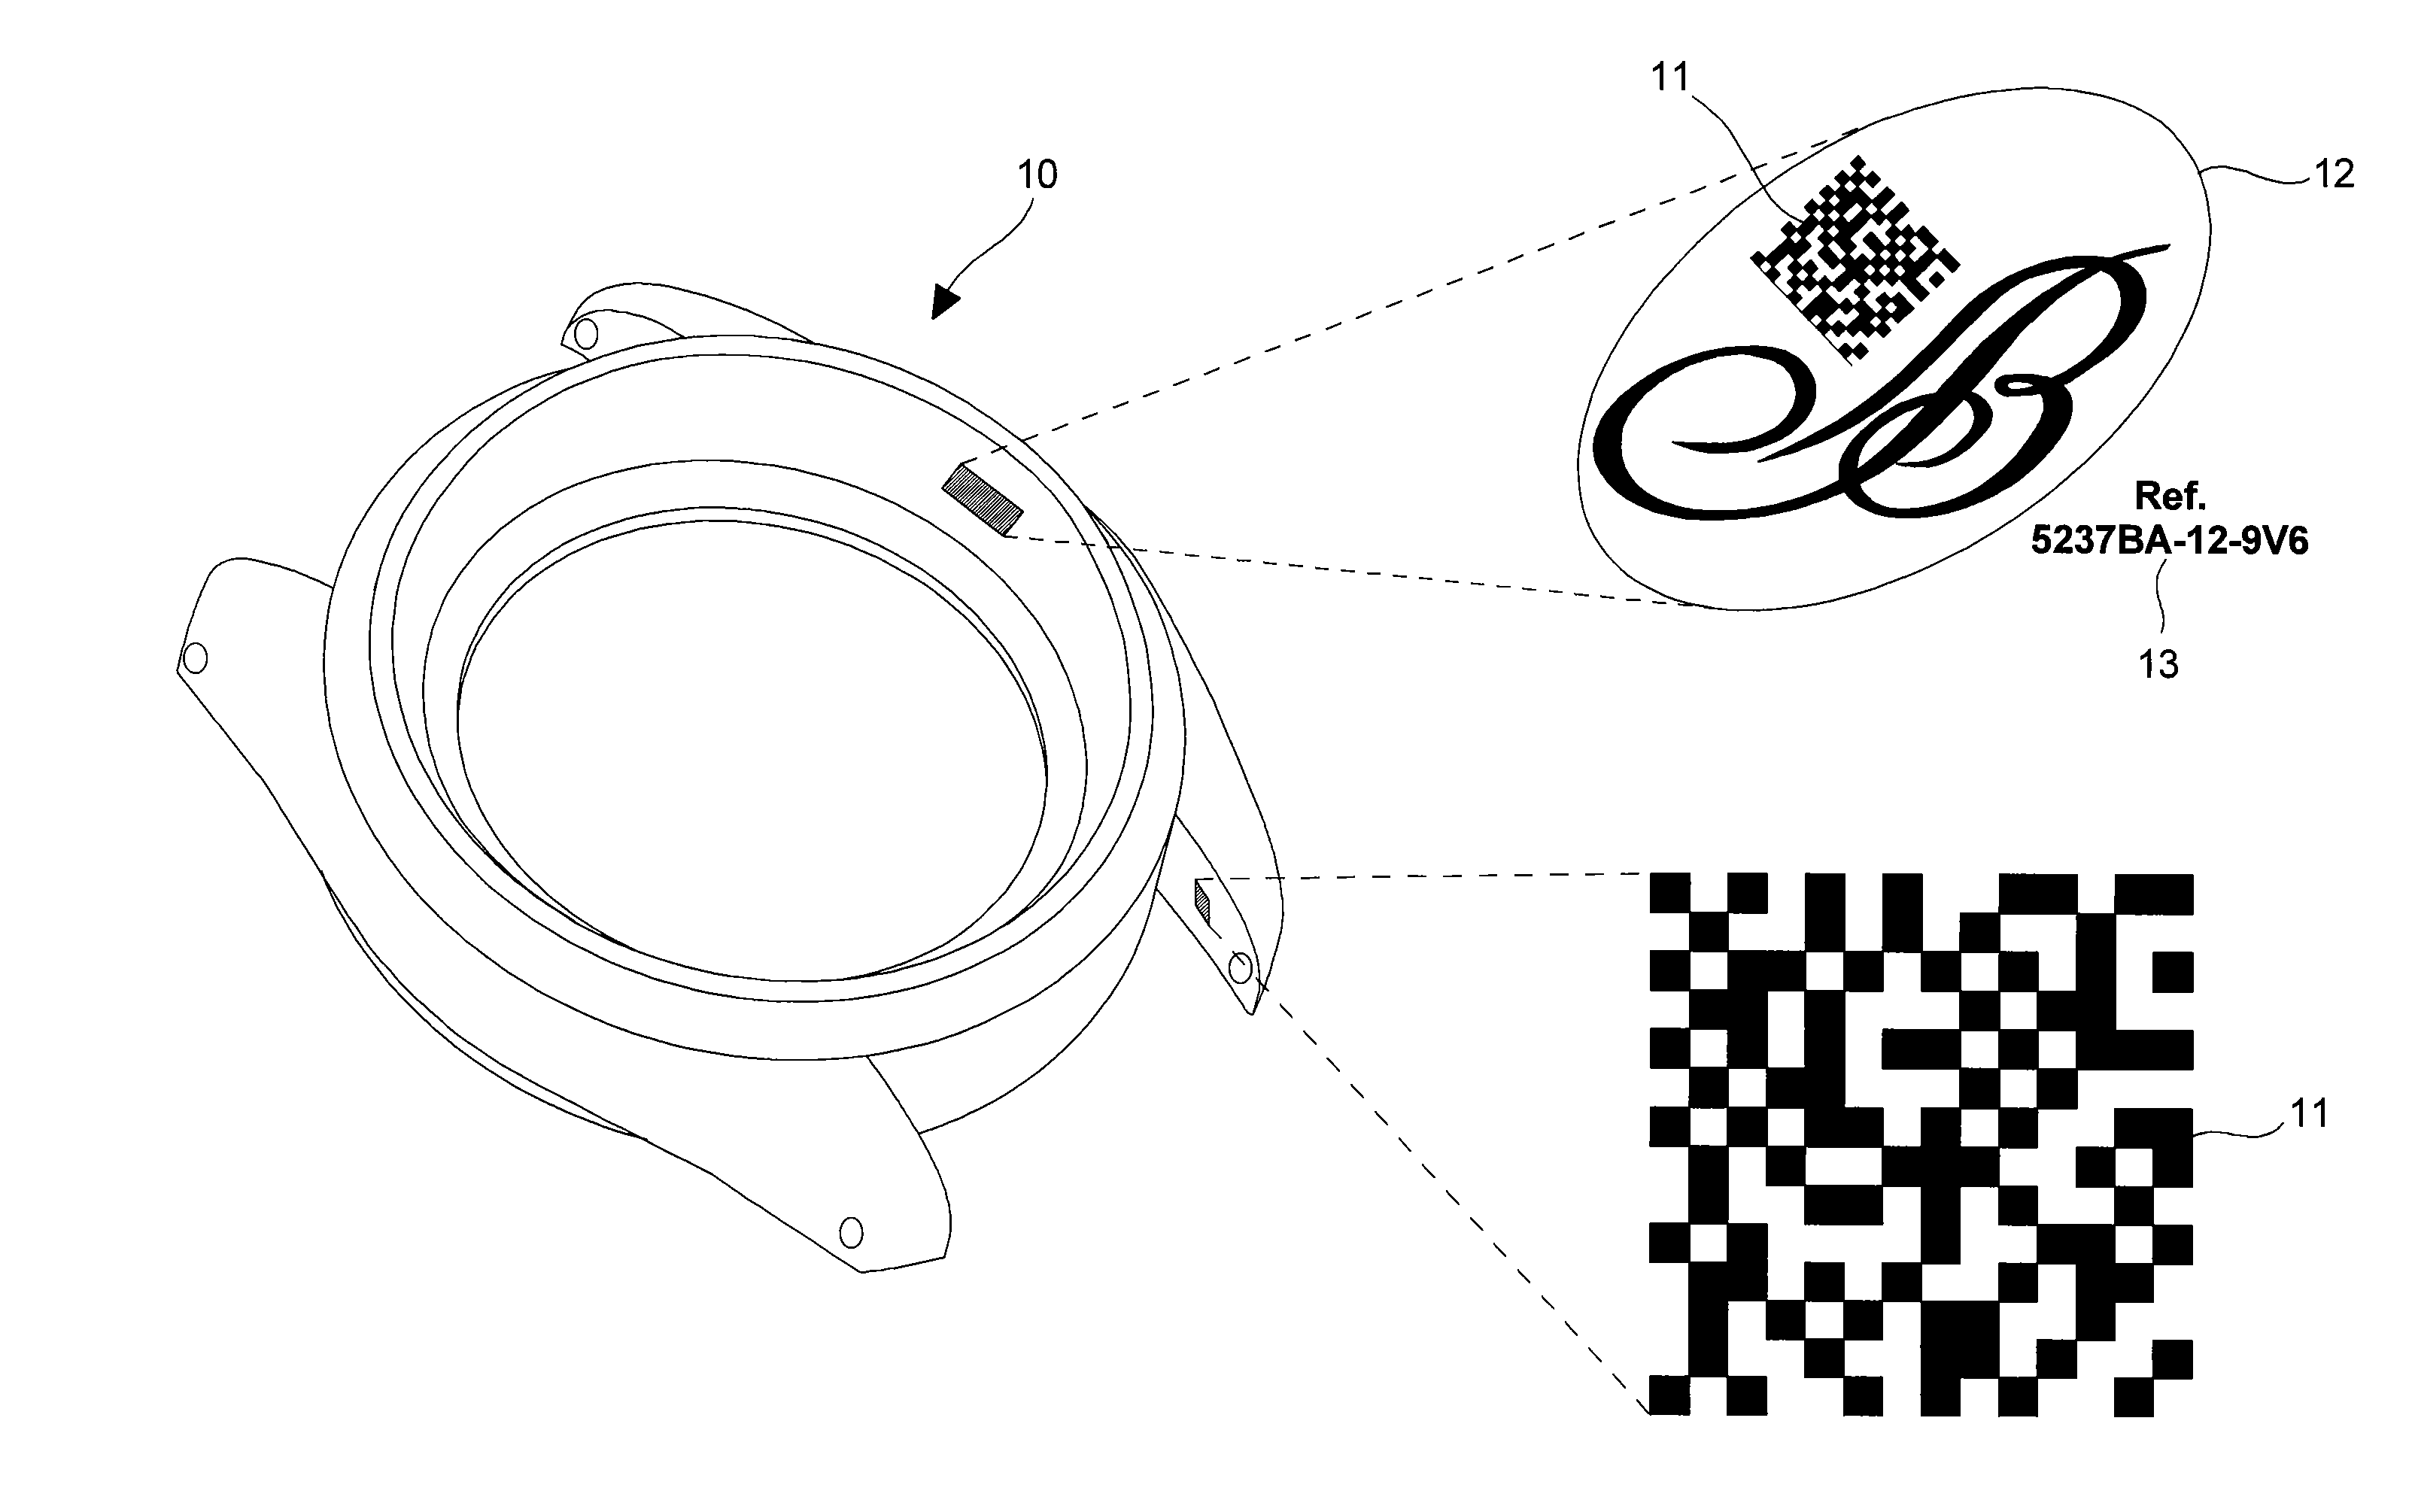 Method of coded marking of a product of small size, and marked product obtained according to said method